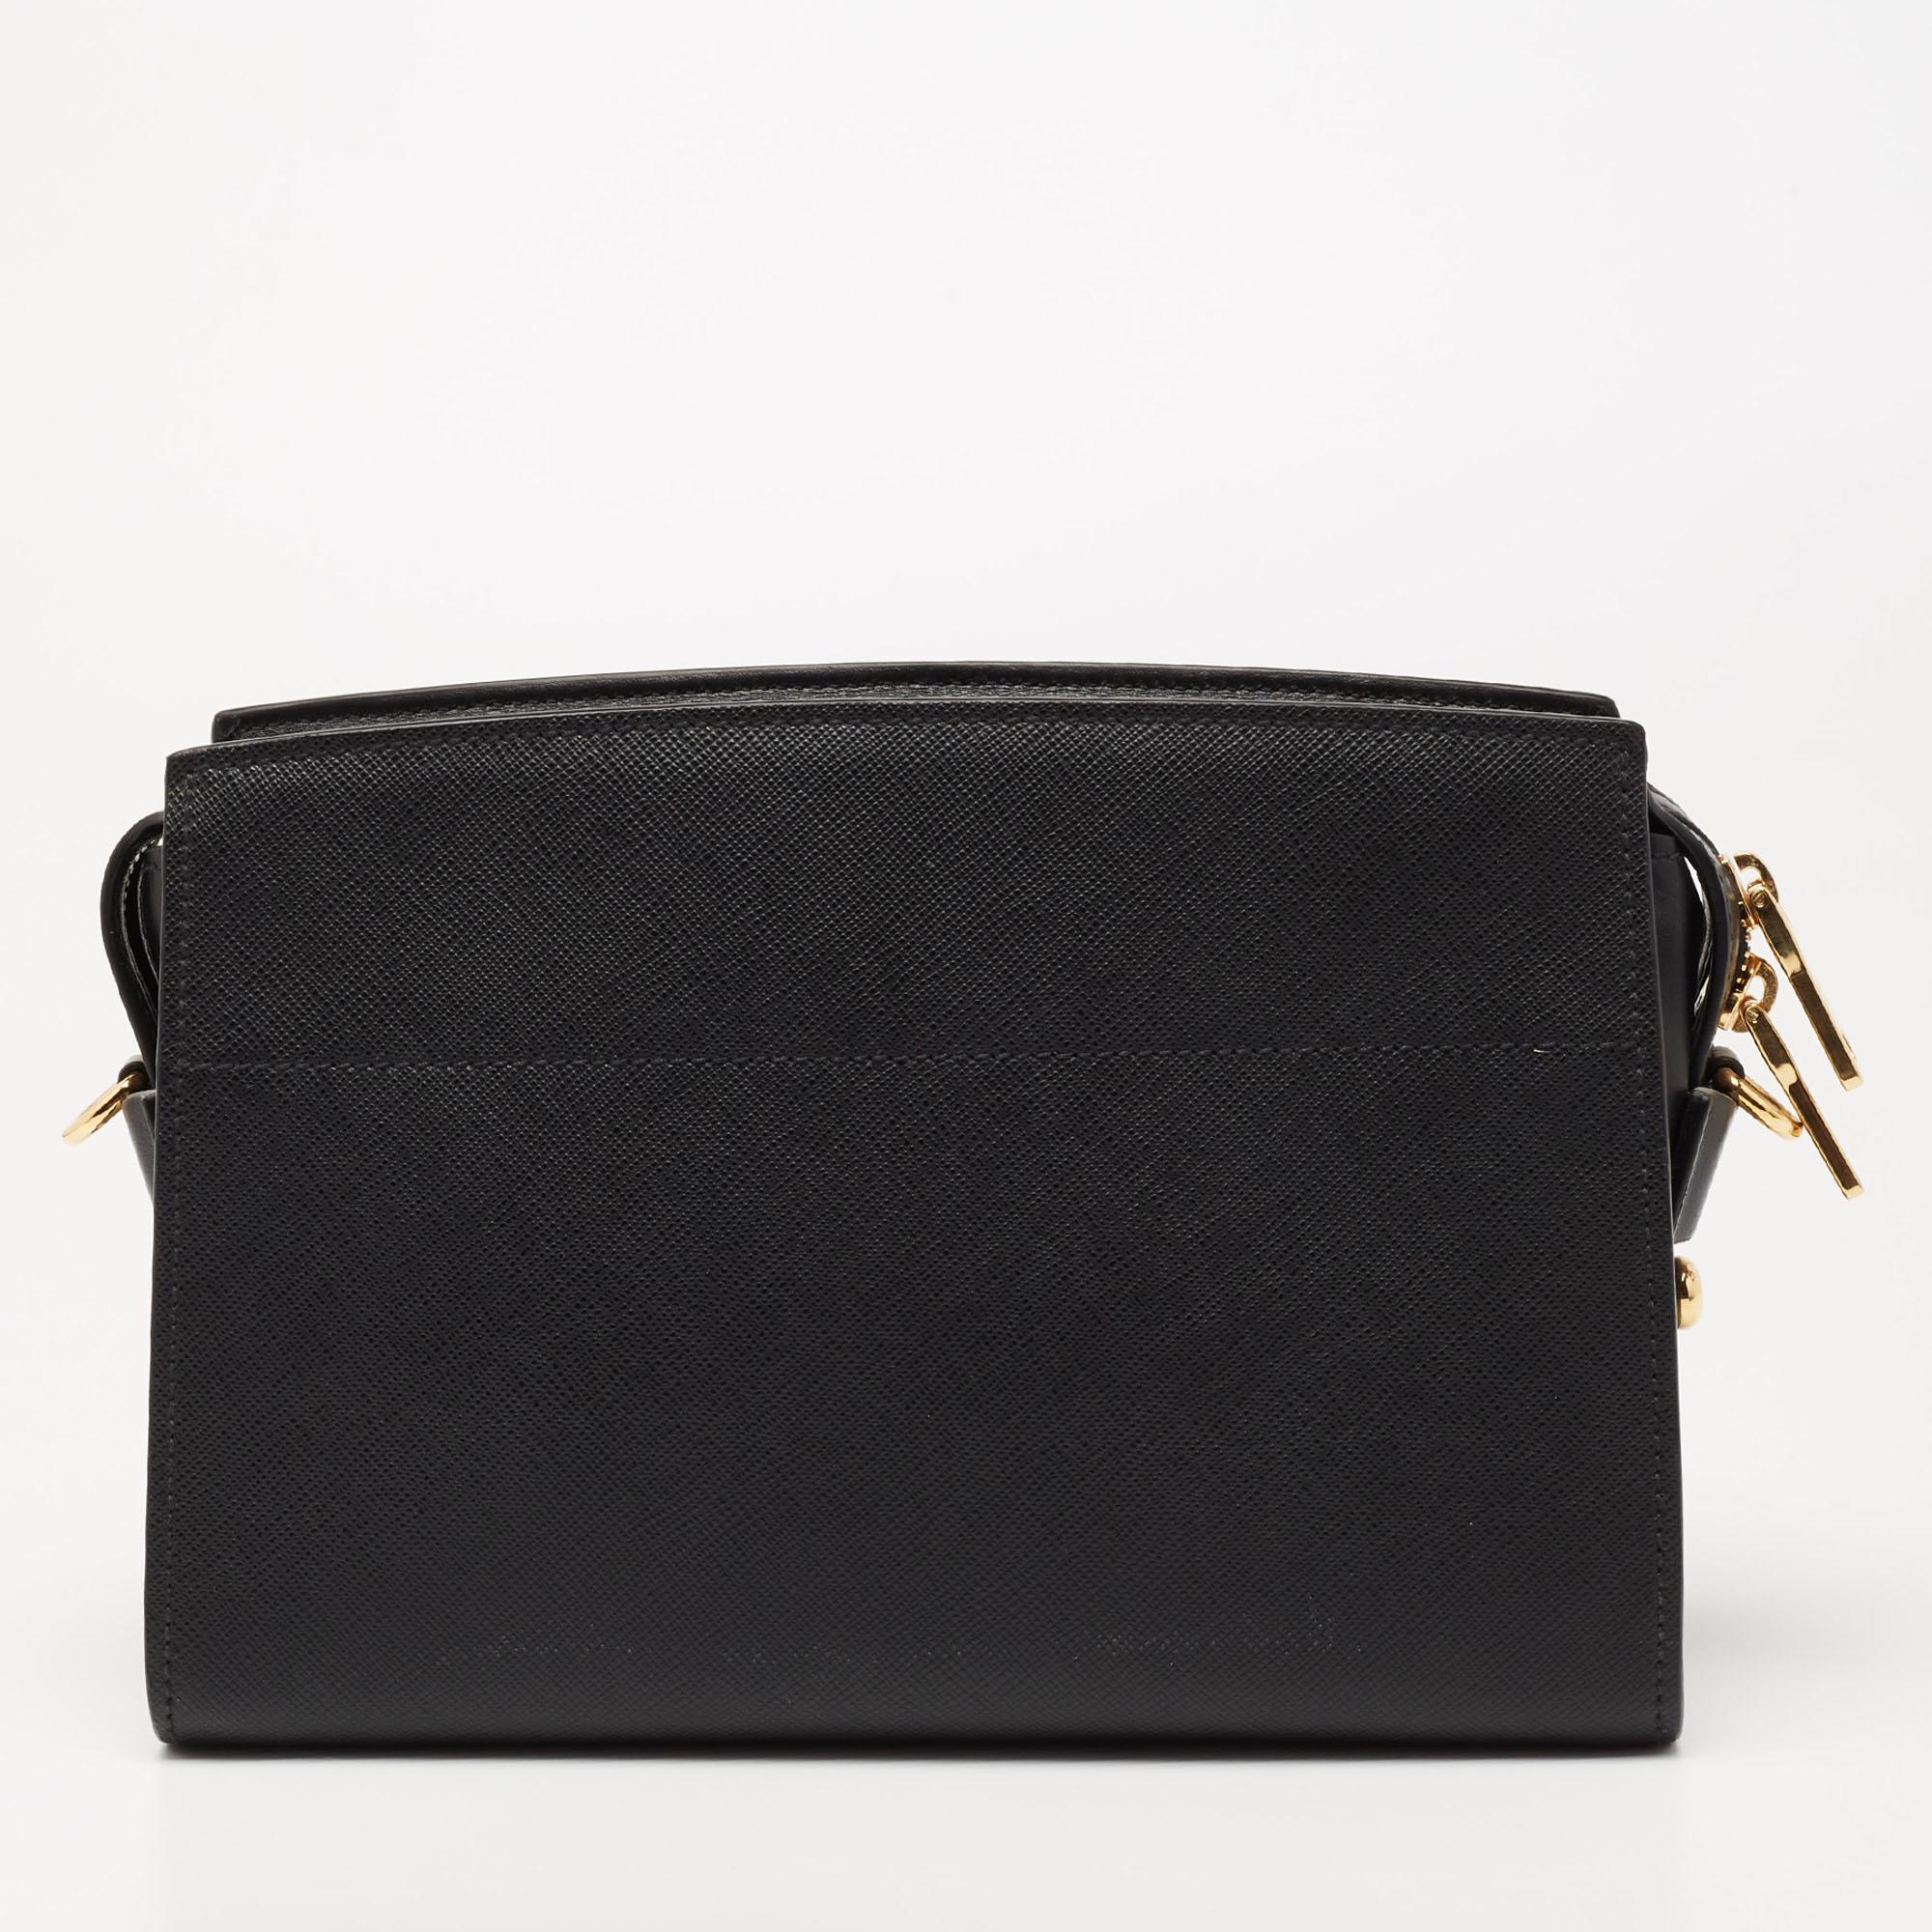 This Esplanade bag by Prada will be a fine companion for work lunches and outings. This chic black bag is brilliantly fashioned and spaciously sized. The Saffiano leather used for making it assures durability while the brand name on the front adds a